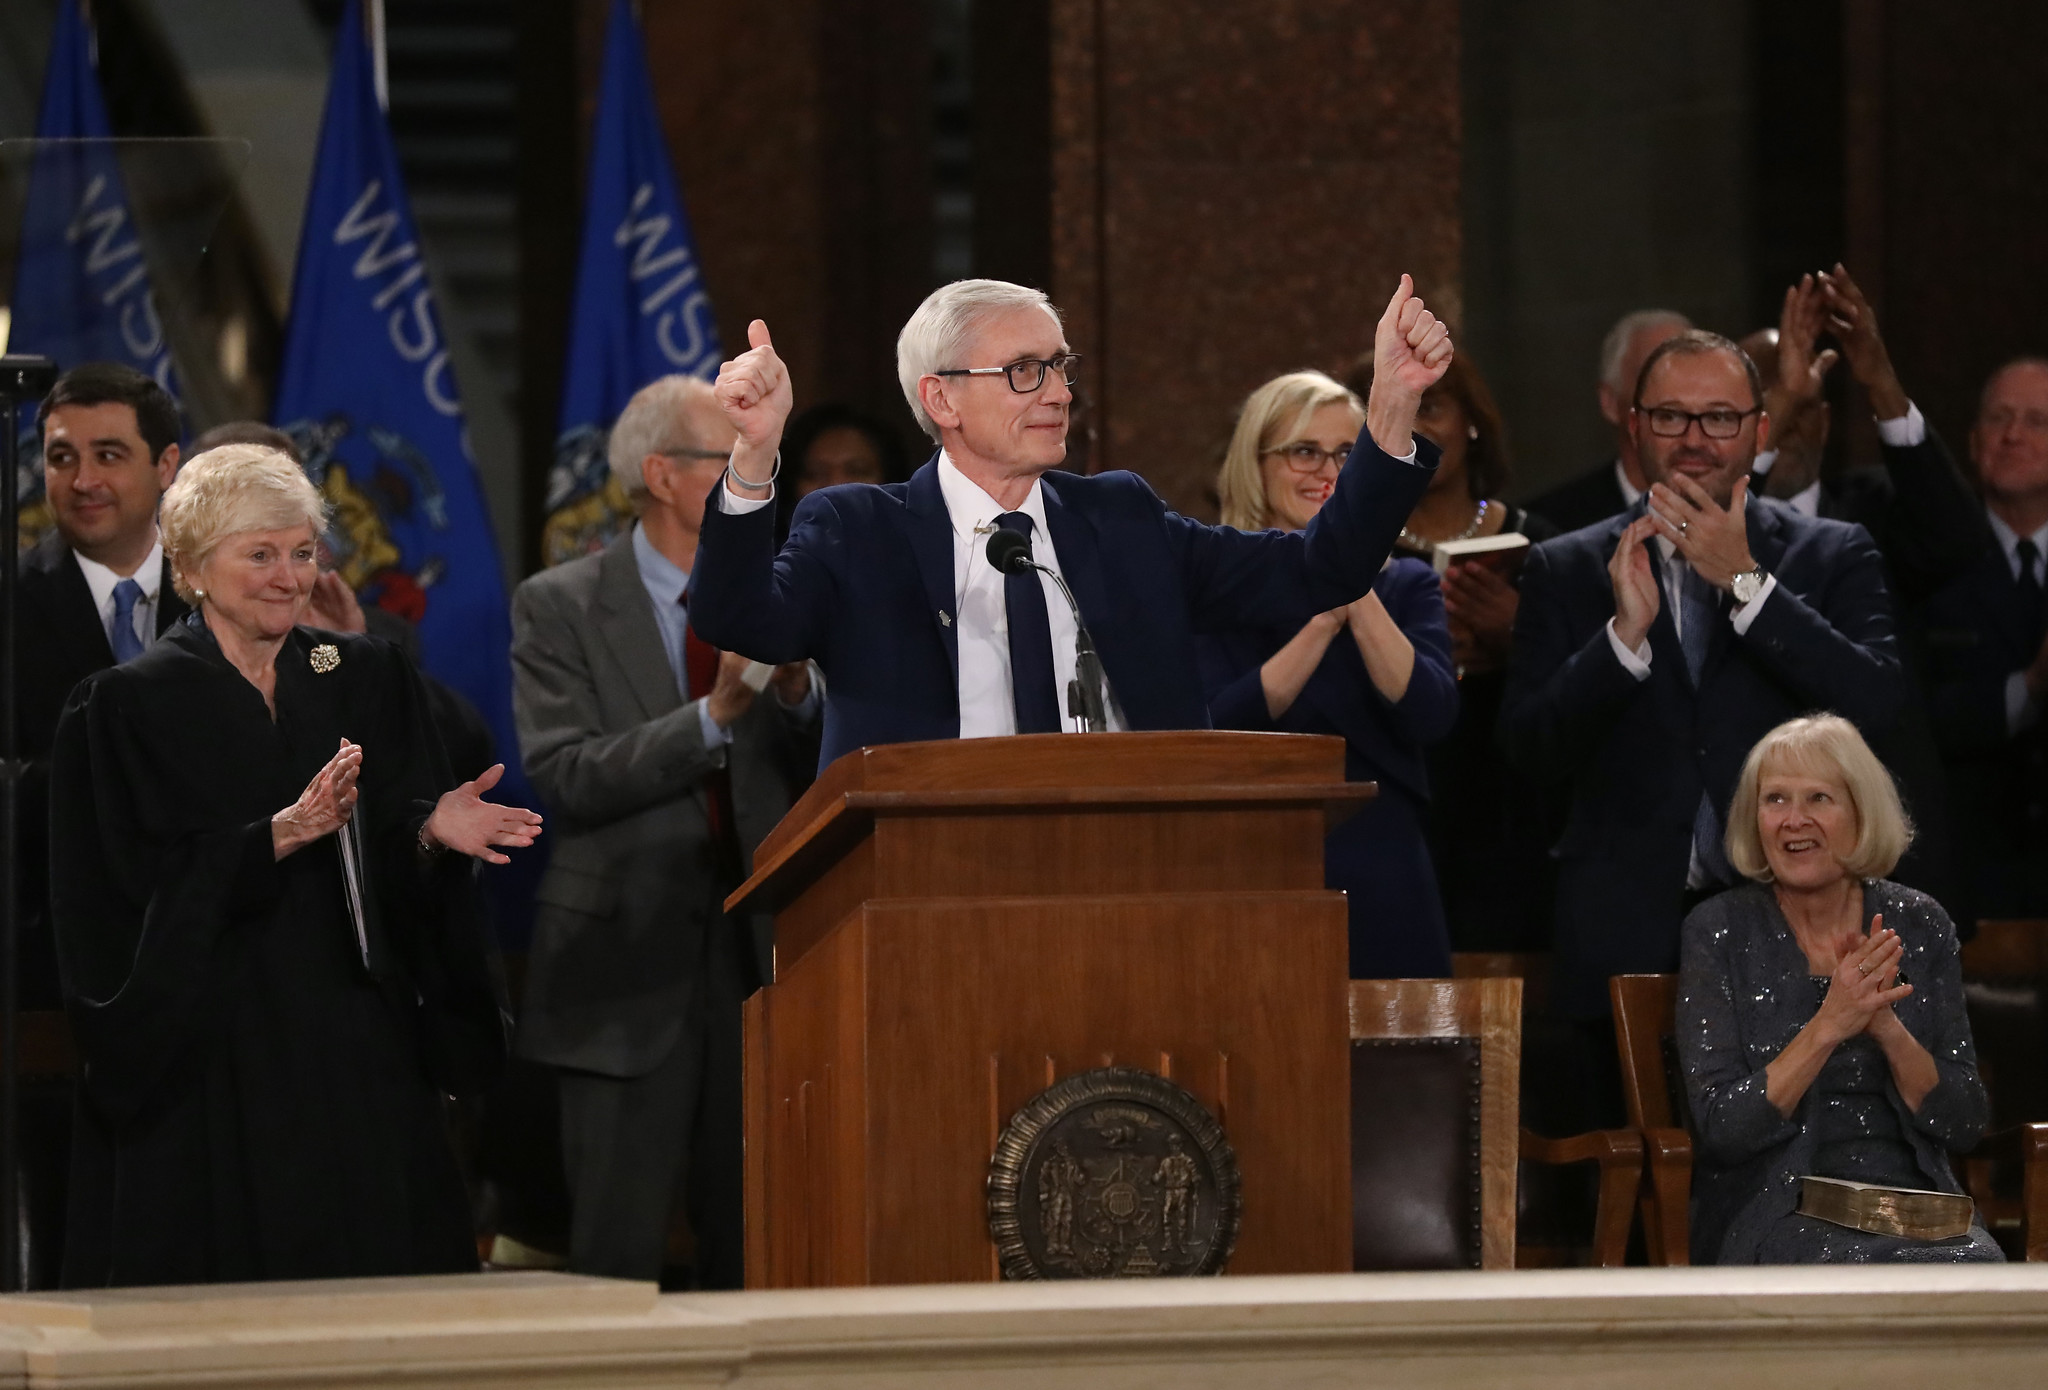 Tony Evers gives two thumbs up after being sworn in as Wisconsin’s 46th governor during a ceremony at the Wisconsin State Capitol on Jan 7, 2019.